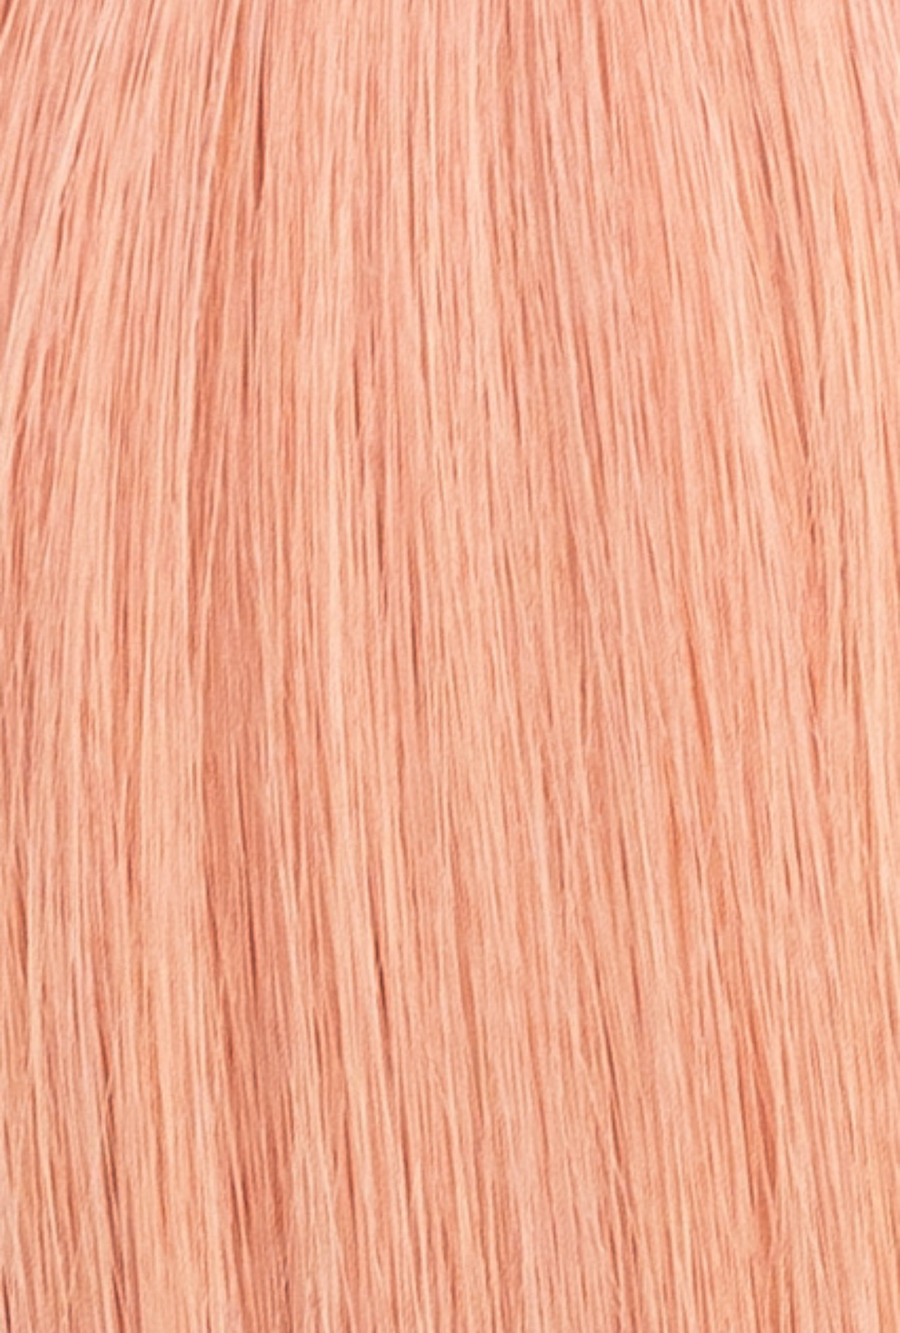 Laced Hair Tape-In Extensions Pink